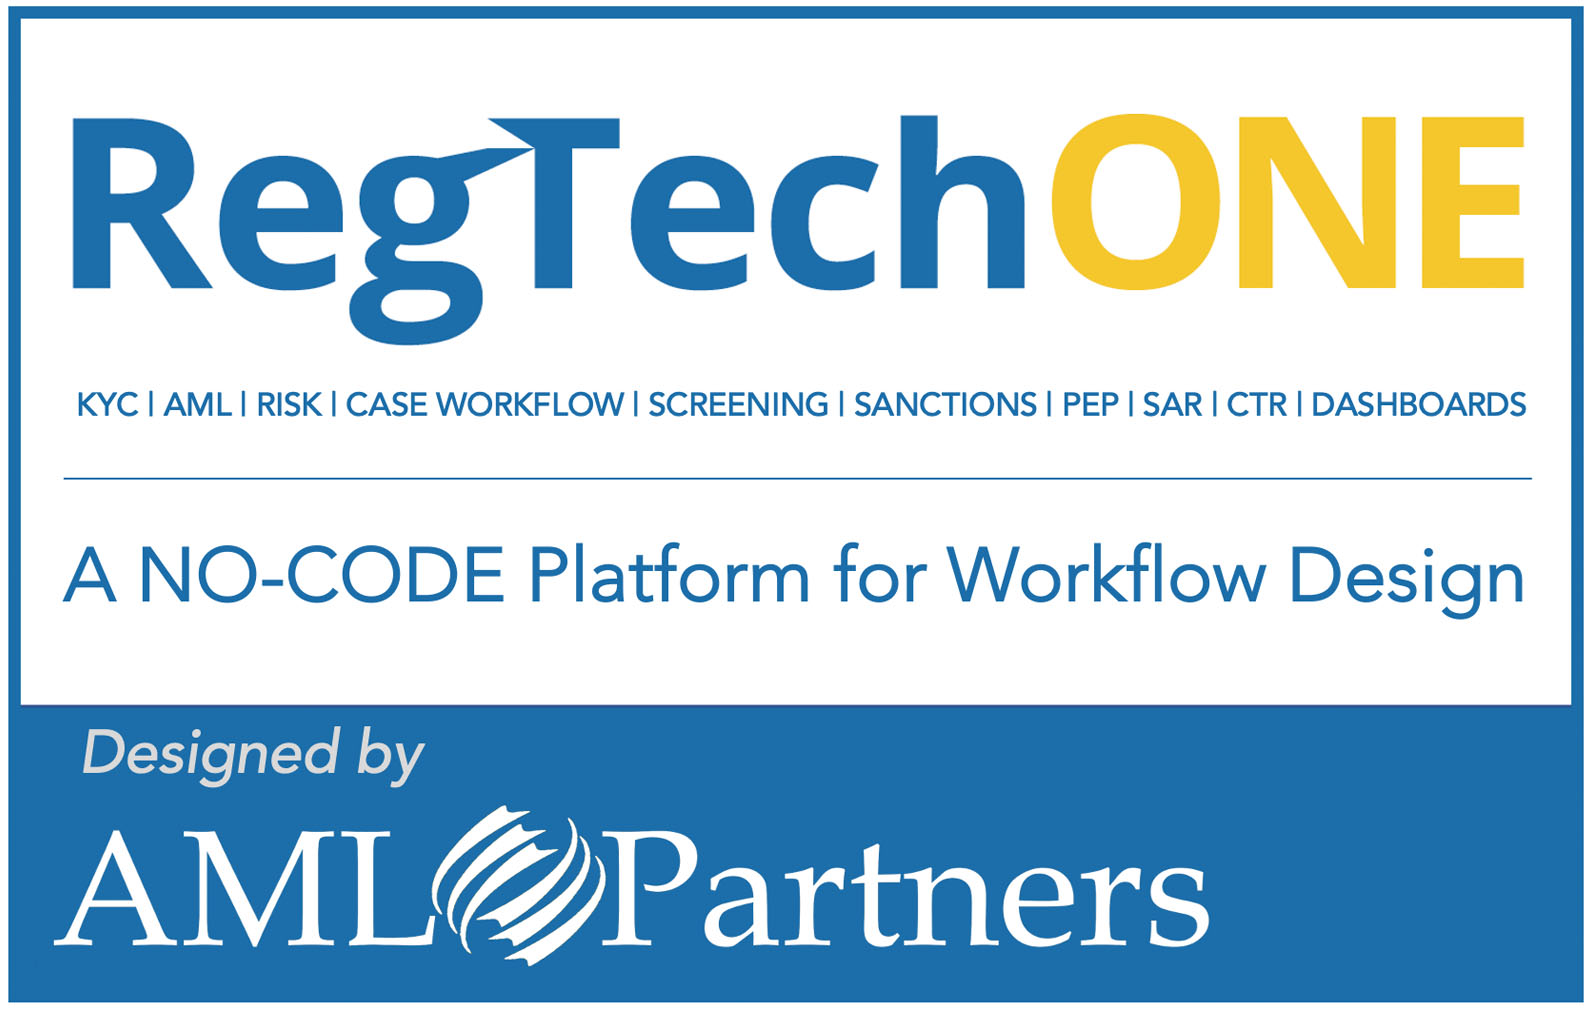 This is logo art. It includes the logos of AML Partners and its RegTechONE platform. The tagline "A no-code platform for workflow design" is under the RegTechONE logo, as is the different types of modules and uses. These include KYC, AML, Risk, case workflow, screening, sanctions, PEP, SAR, CTR, and dashboards.